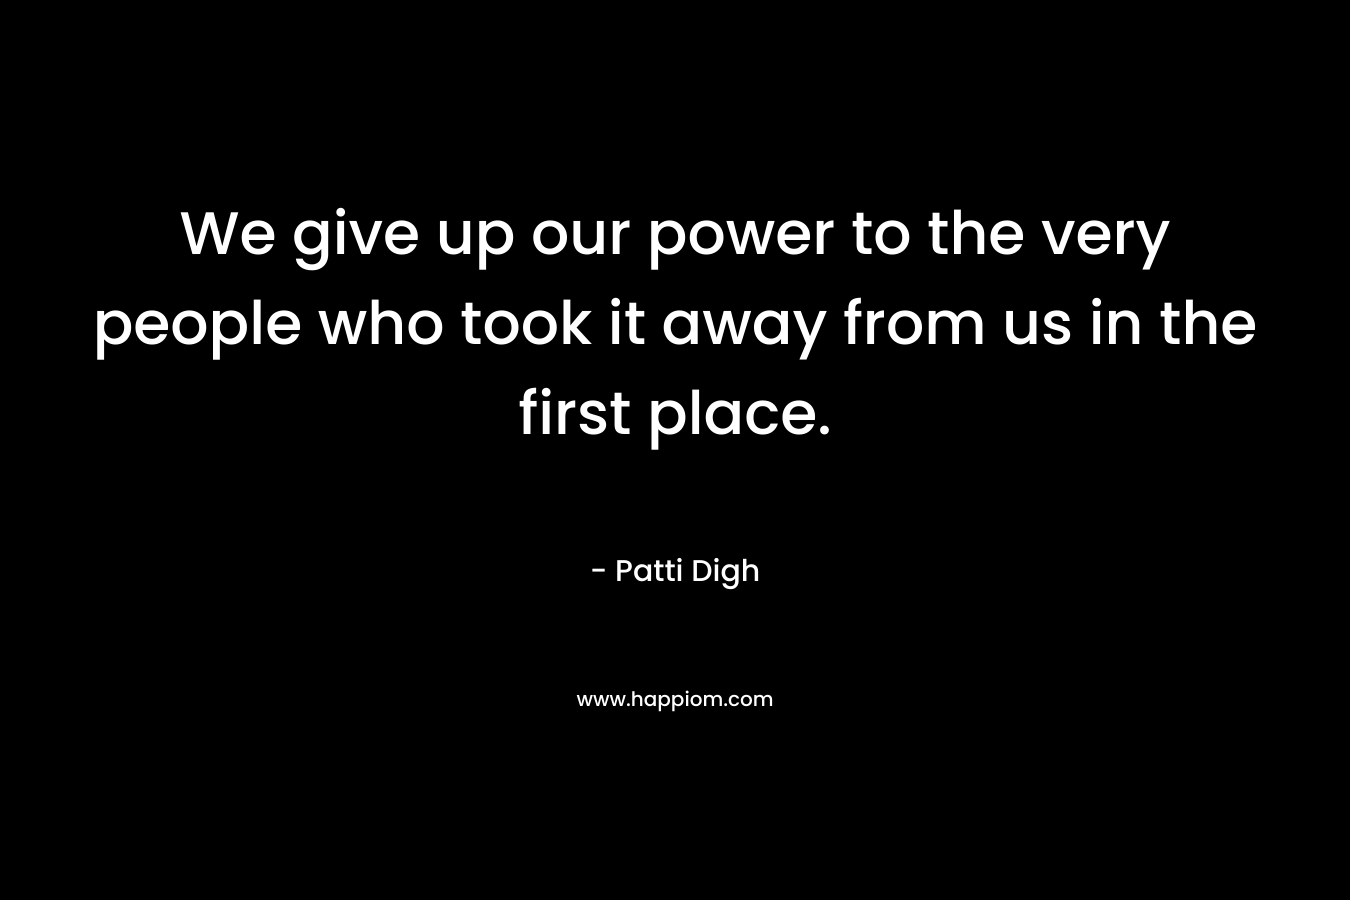 We give up our power to the very people who took it away from us in the first place.